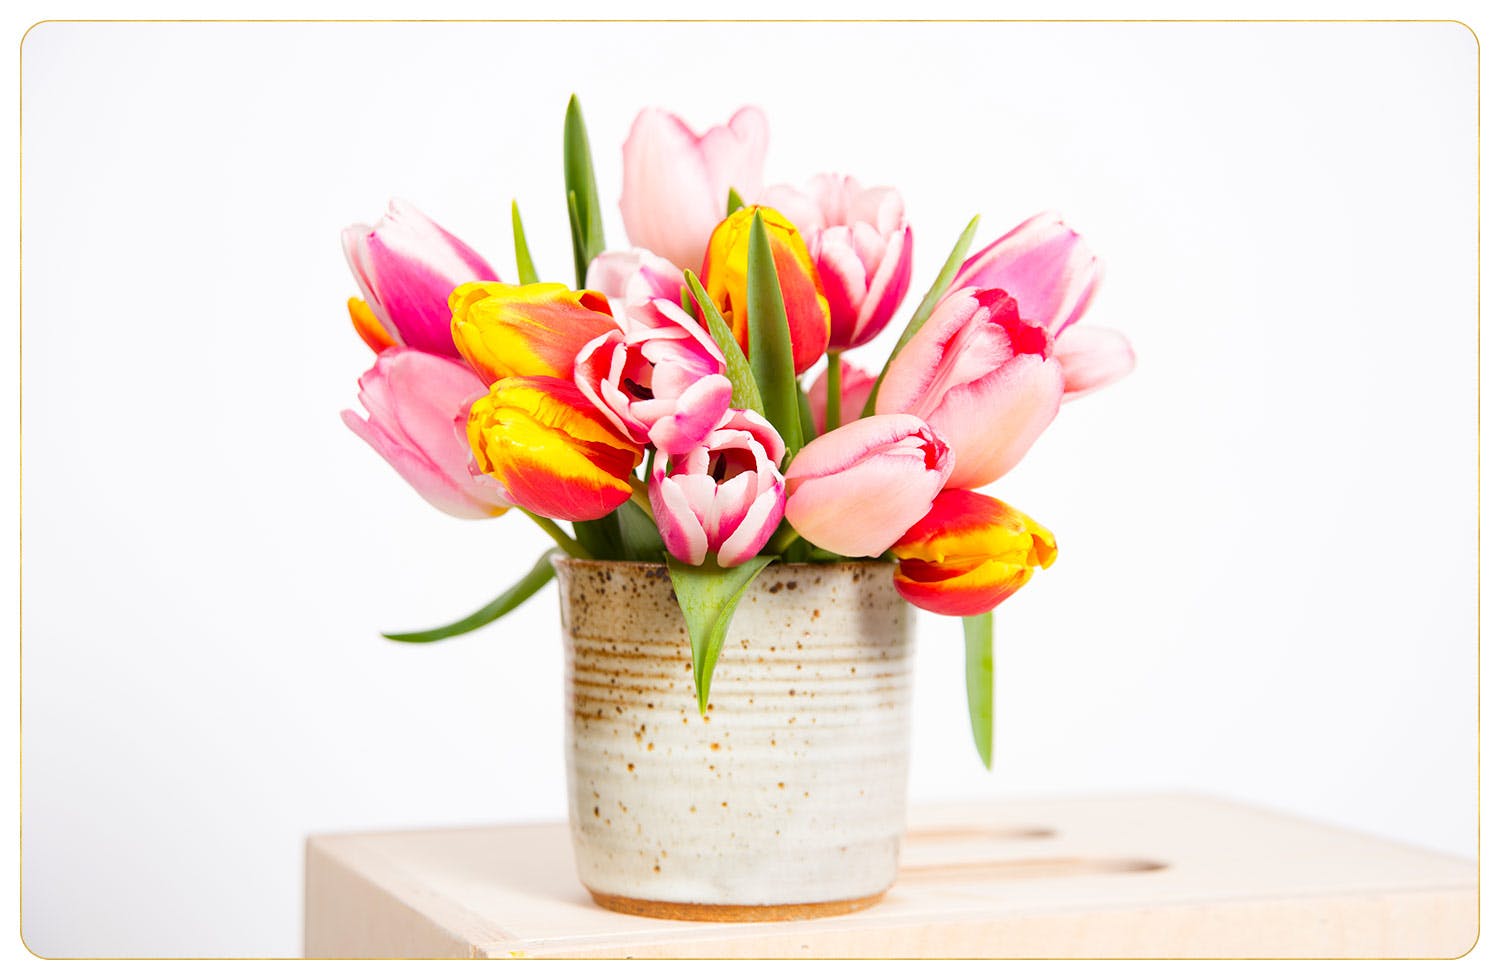 Tulip Care Guide: How to Care for Tulips + Growing Tips